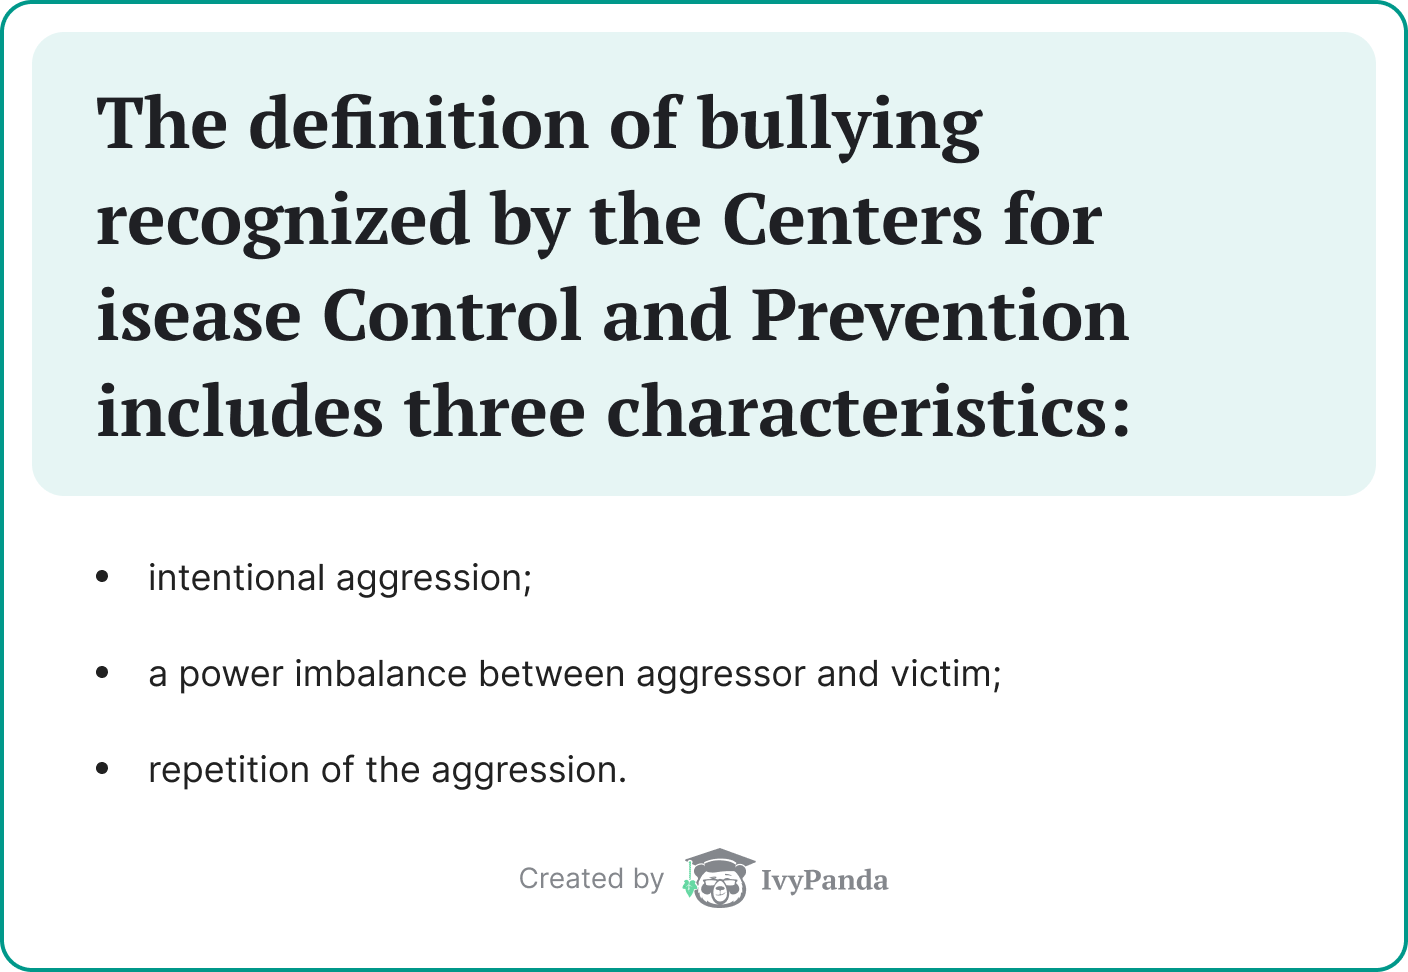 The definition of bullying includes three characteristics.